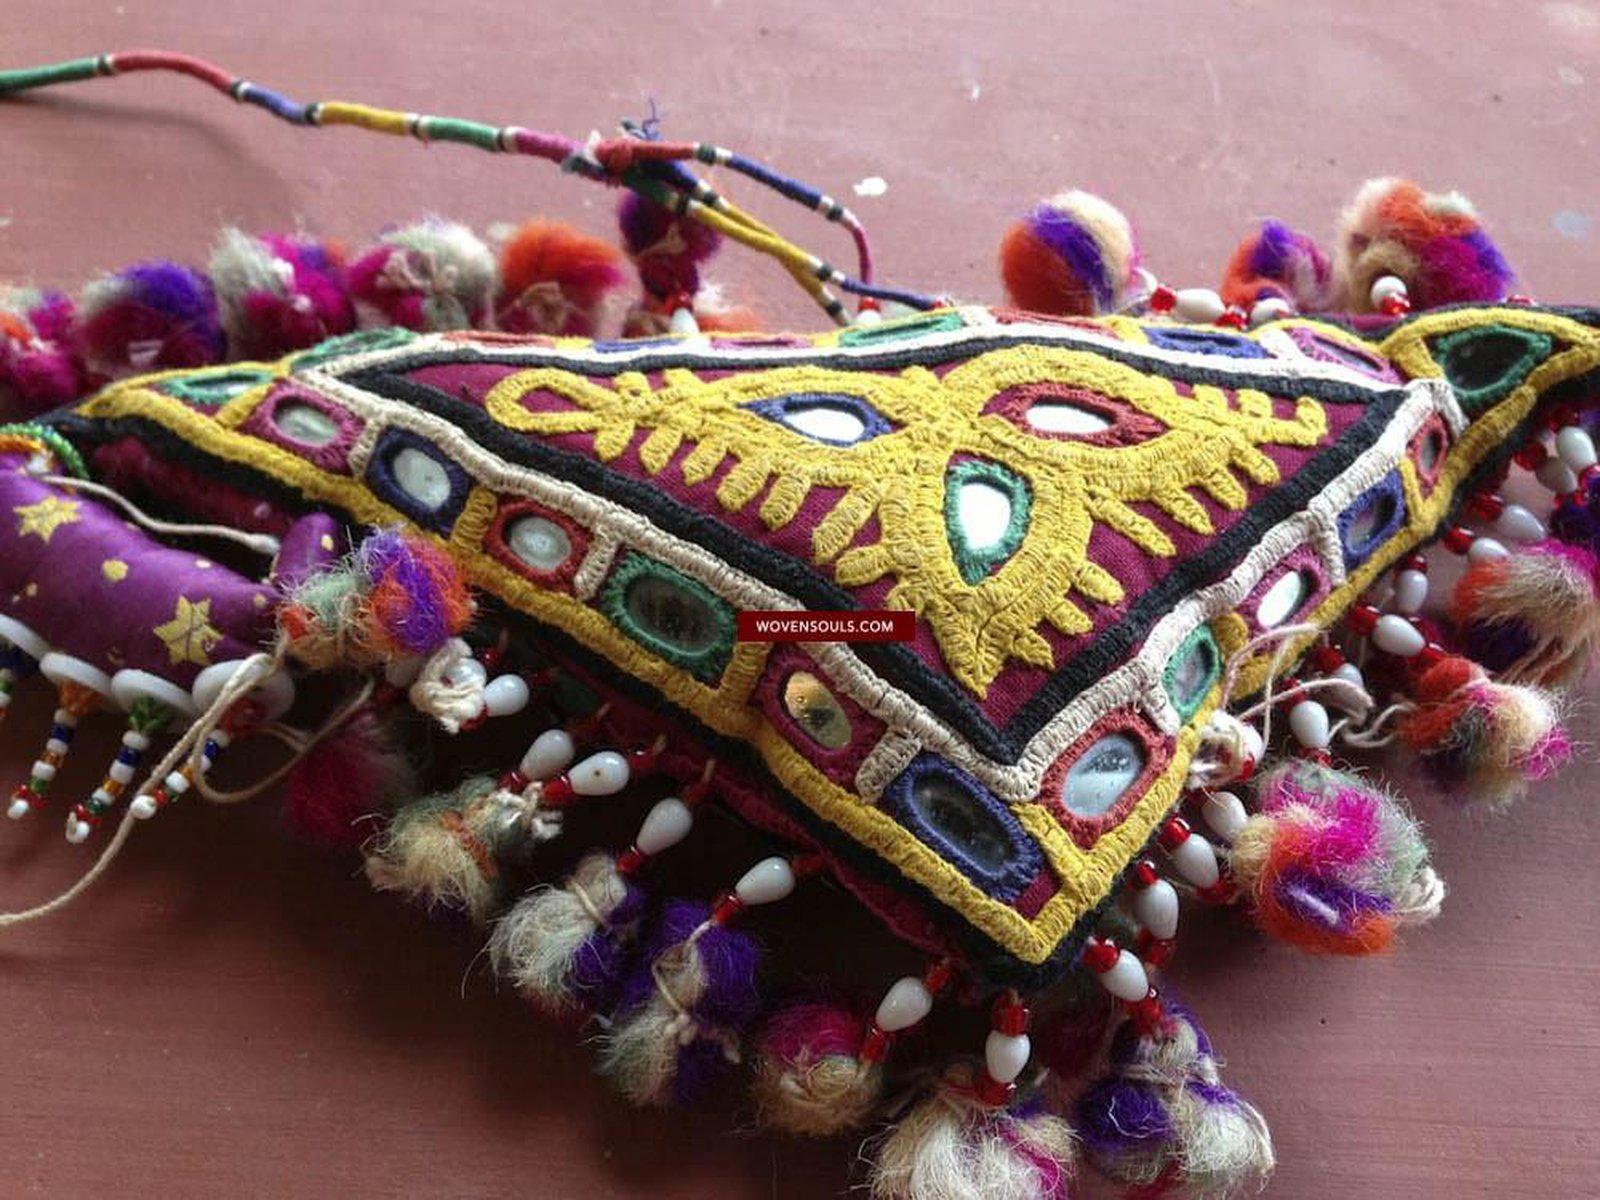 453 SOLD Vintage Indian Tribal Embroidery Textile Art on Handmade Child's Toy-WOVENSOULS-Antique-Vintage-Textiles-Art-Decor